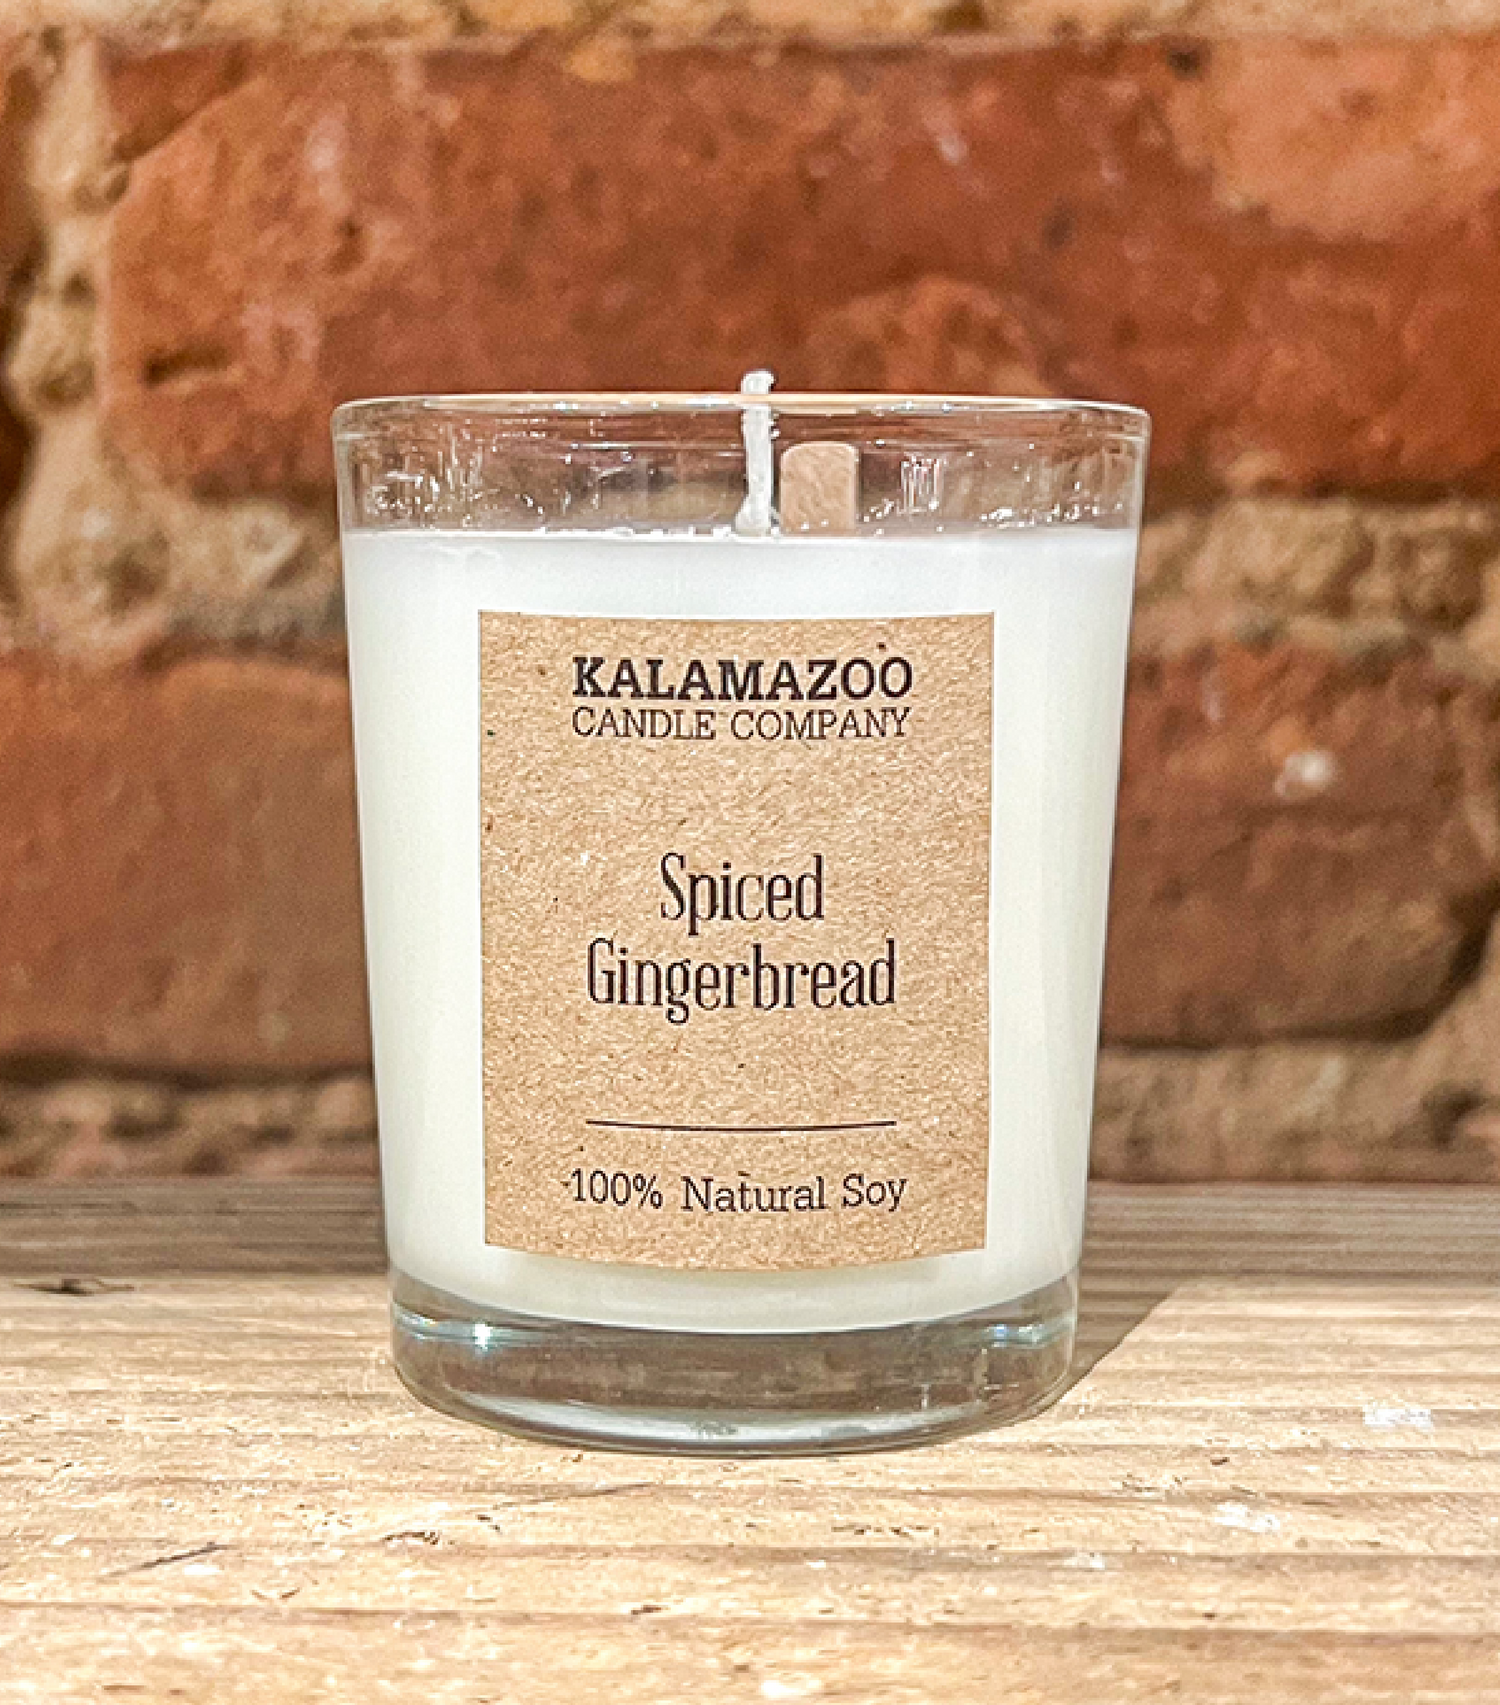 White ginger, allspice, red nutmeg, and cinnamon folded into creamy vanilla and buttery toffee, finished with hints of mellow musk and white cocoa. Made In Kalamazoo, MI.